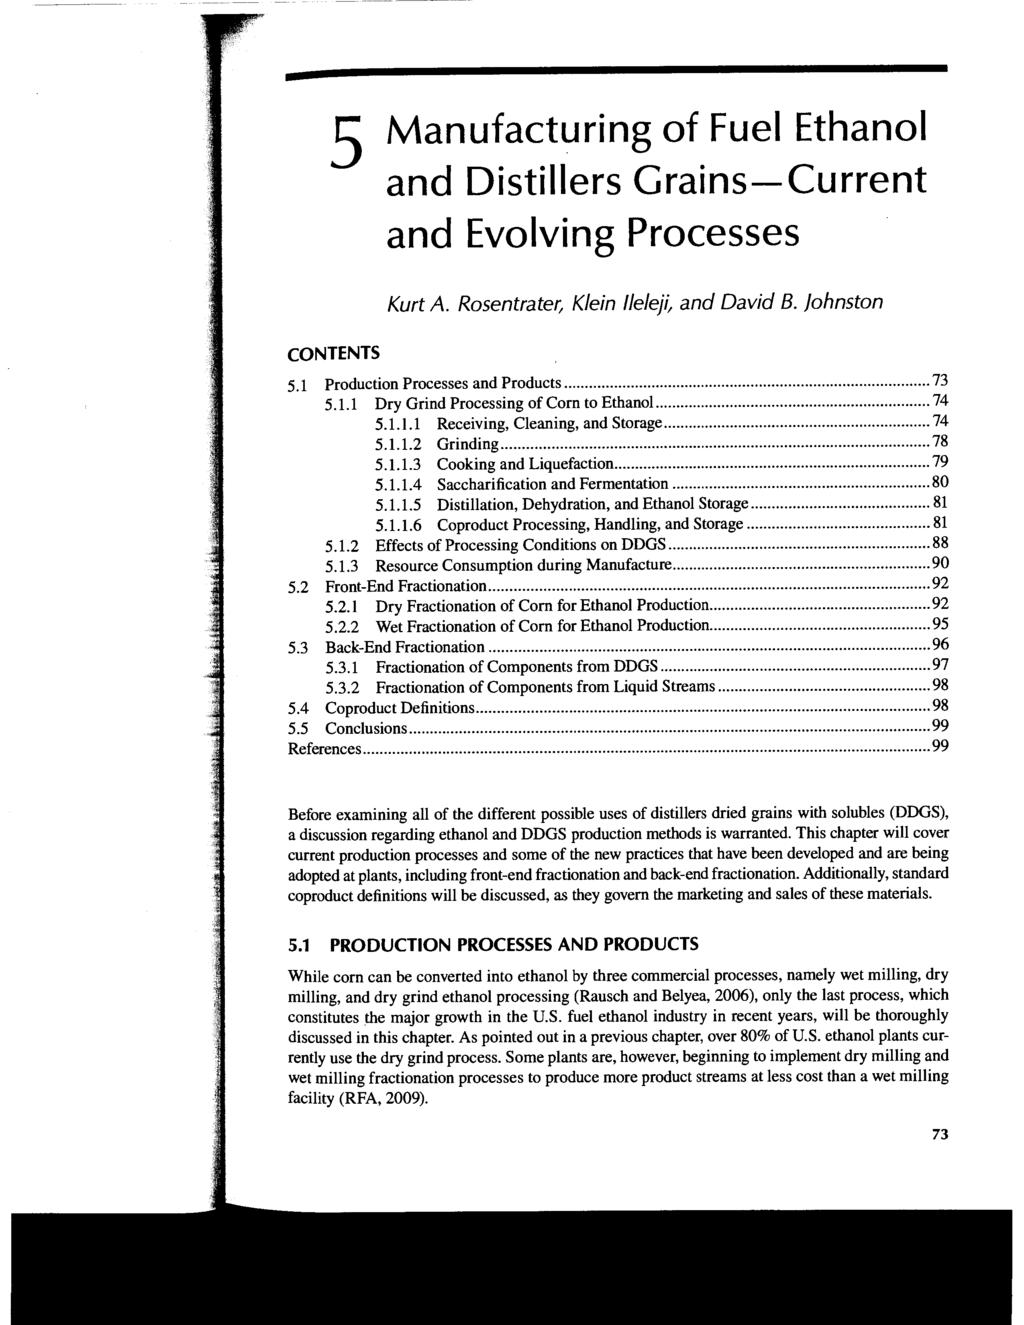 5 Manufacturing of Fuel Ethanol and Distillers Grains-Current and Evolving Processes CONTENTS Kurt A. Rosentrate" Klein 1/eleA and David B. johnston 5.1 Production Processes and Products... 73 5.1.1 Dry Grind Processing of Corn to Ethanol.